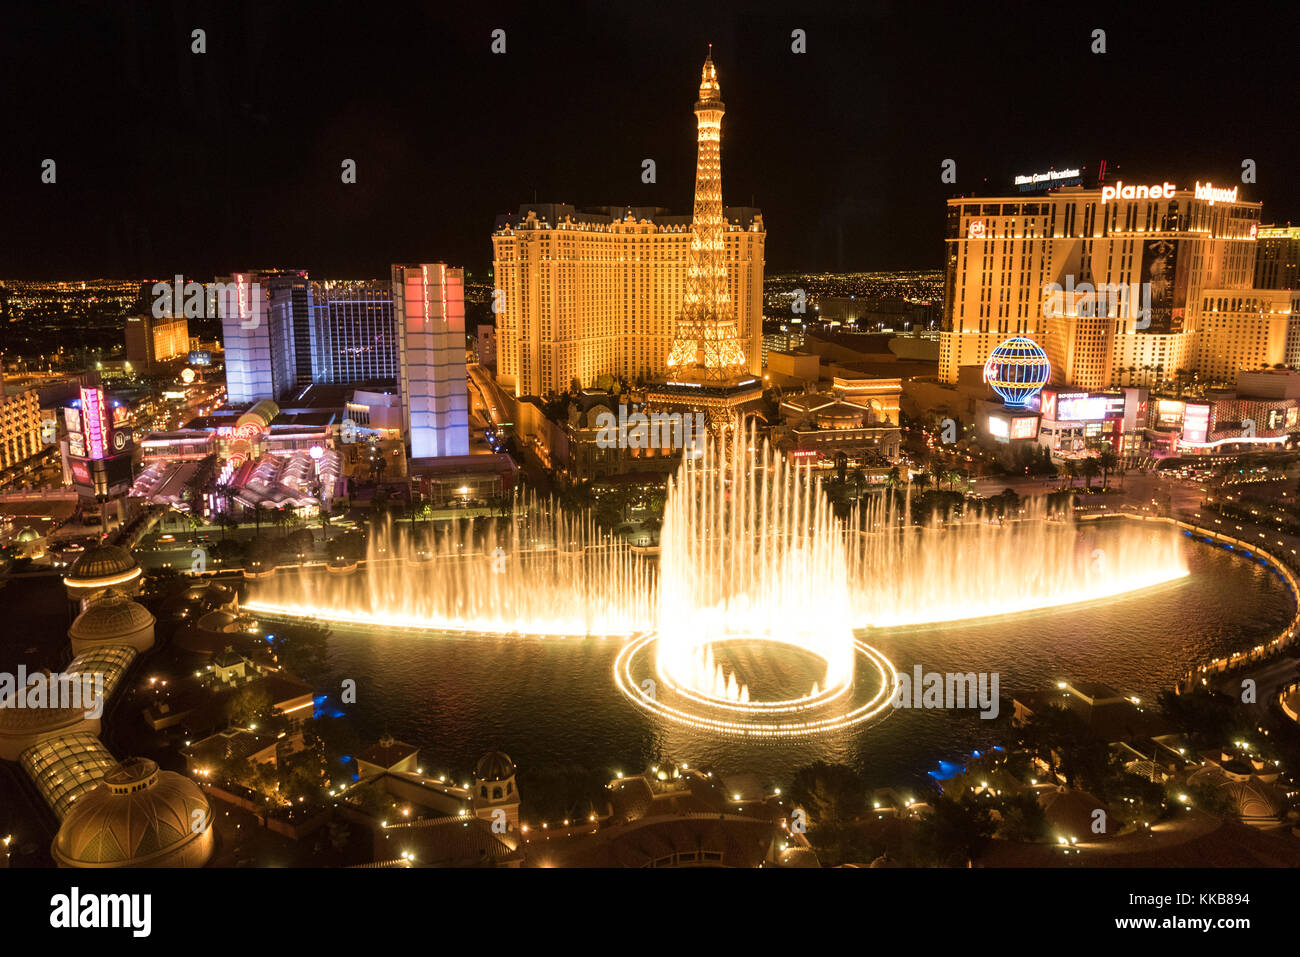 View of Bellagio fountains and part of the Strip at night, Las Vegas,  Nevada, USA Stock Photo - Alamy